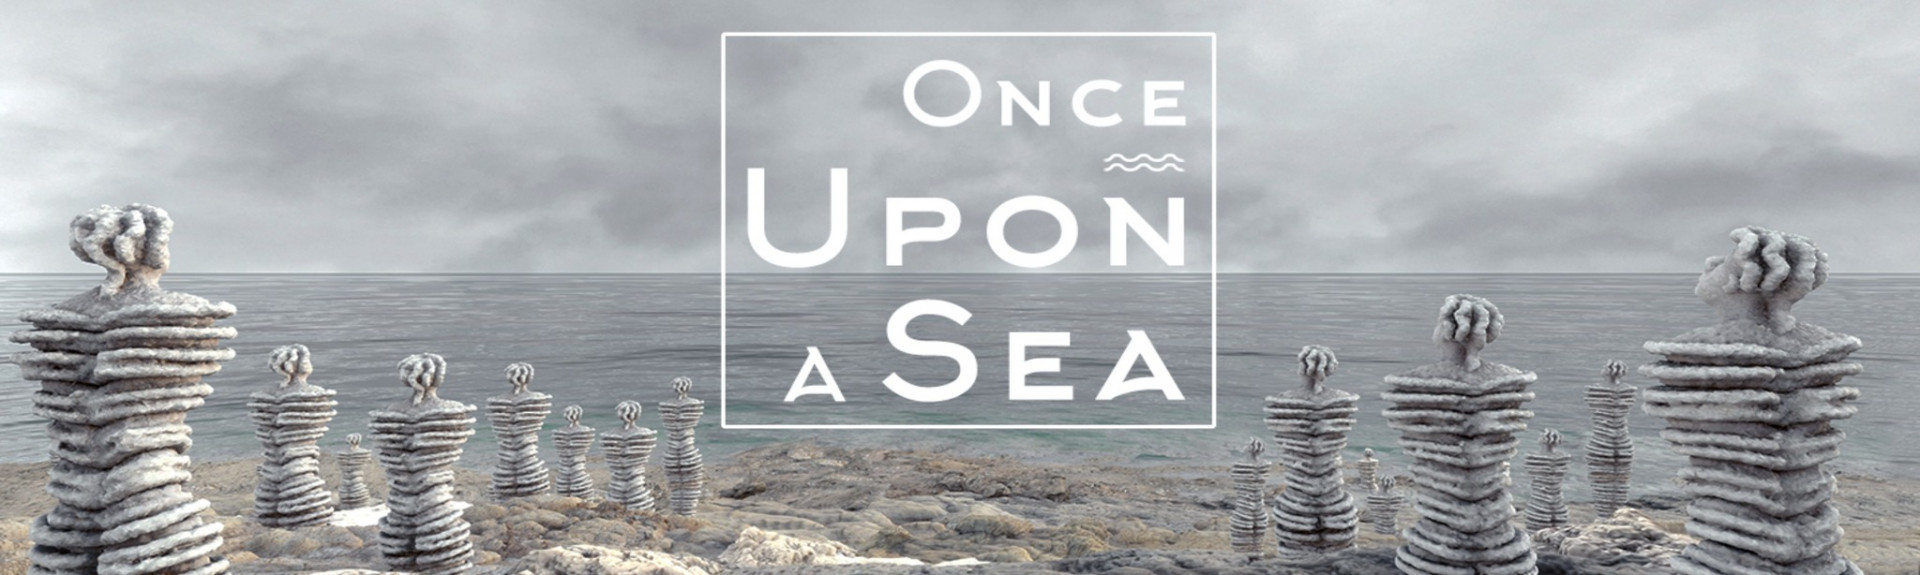 Once Upon a Sea - Ronit Hillel - The Muse